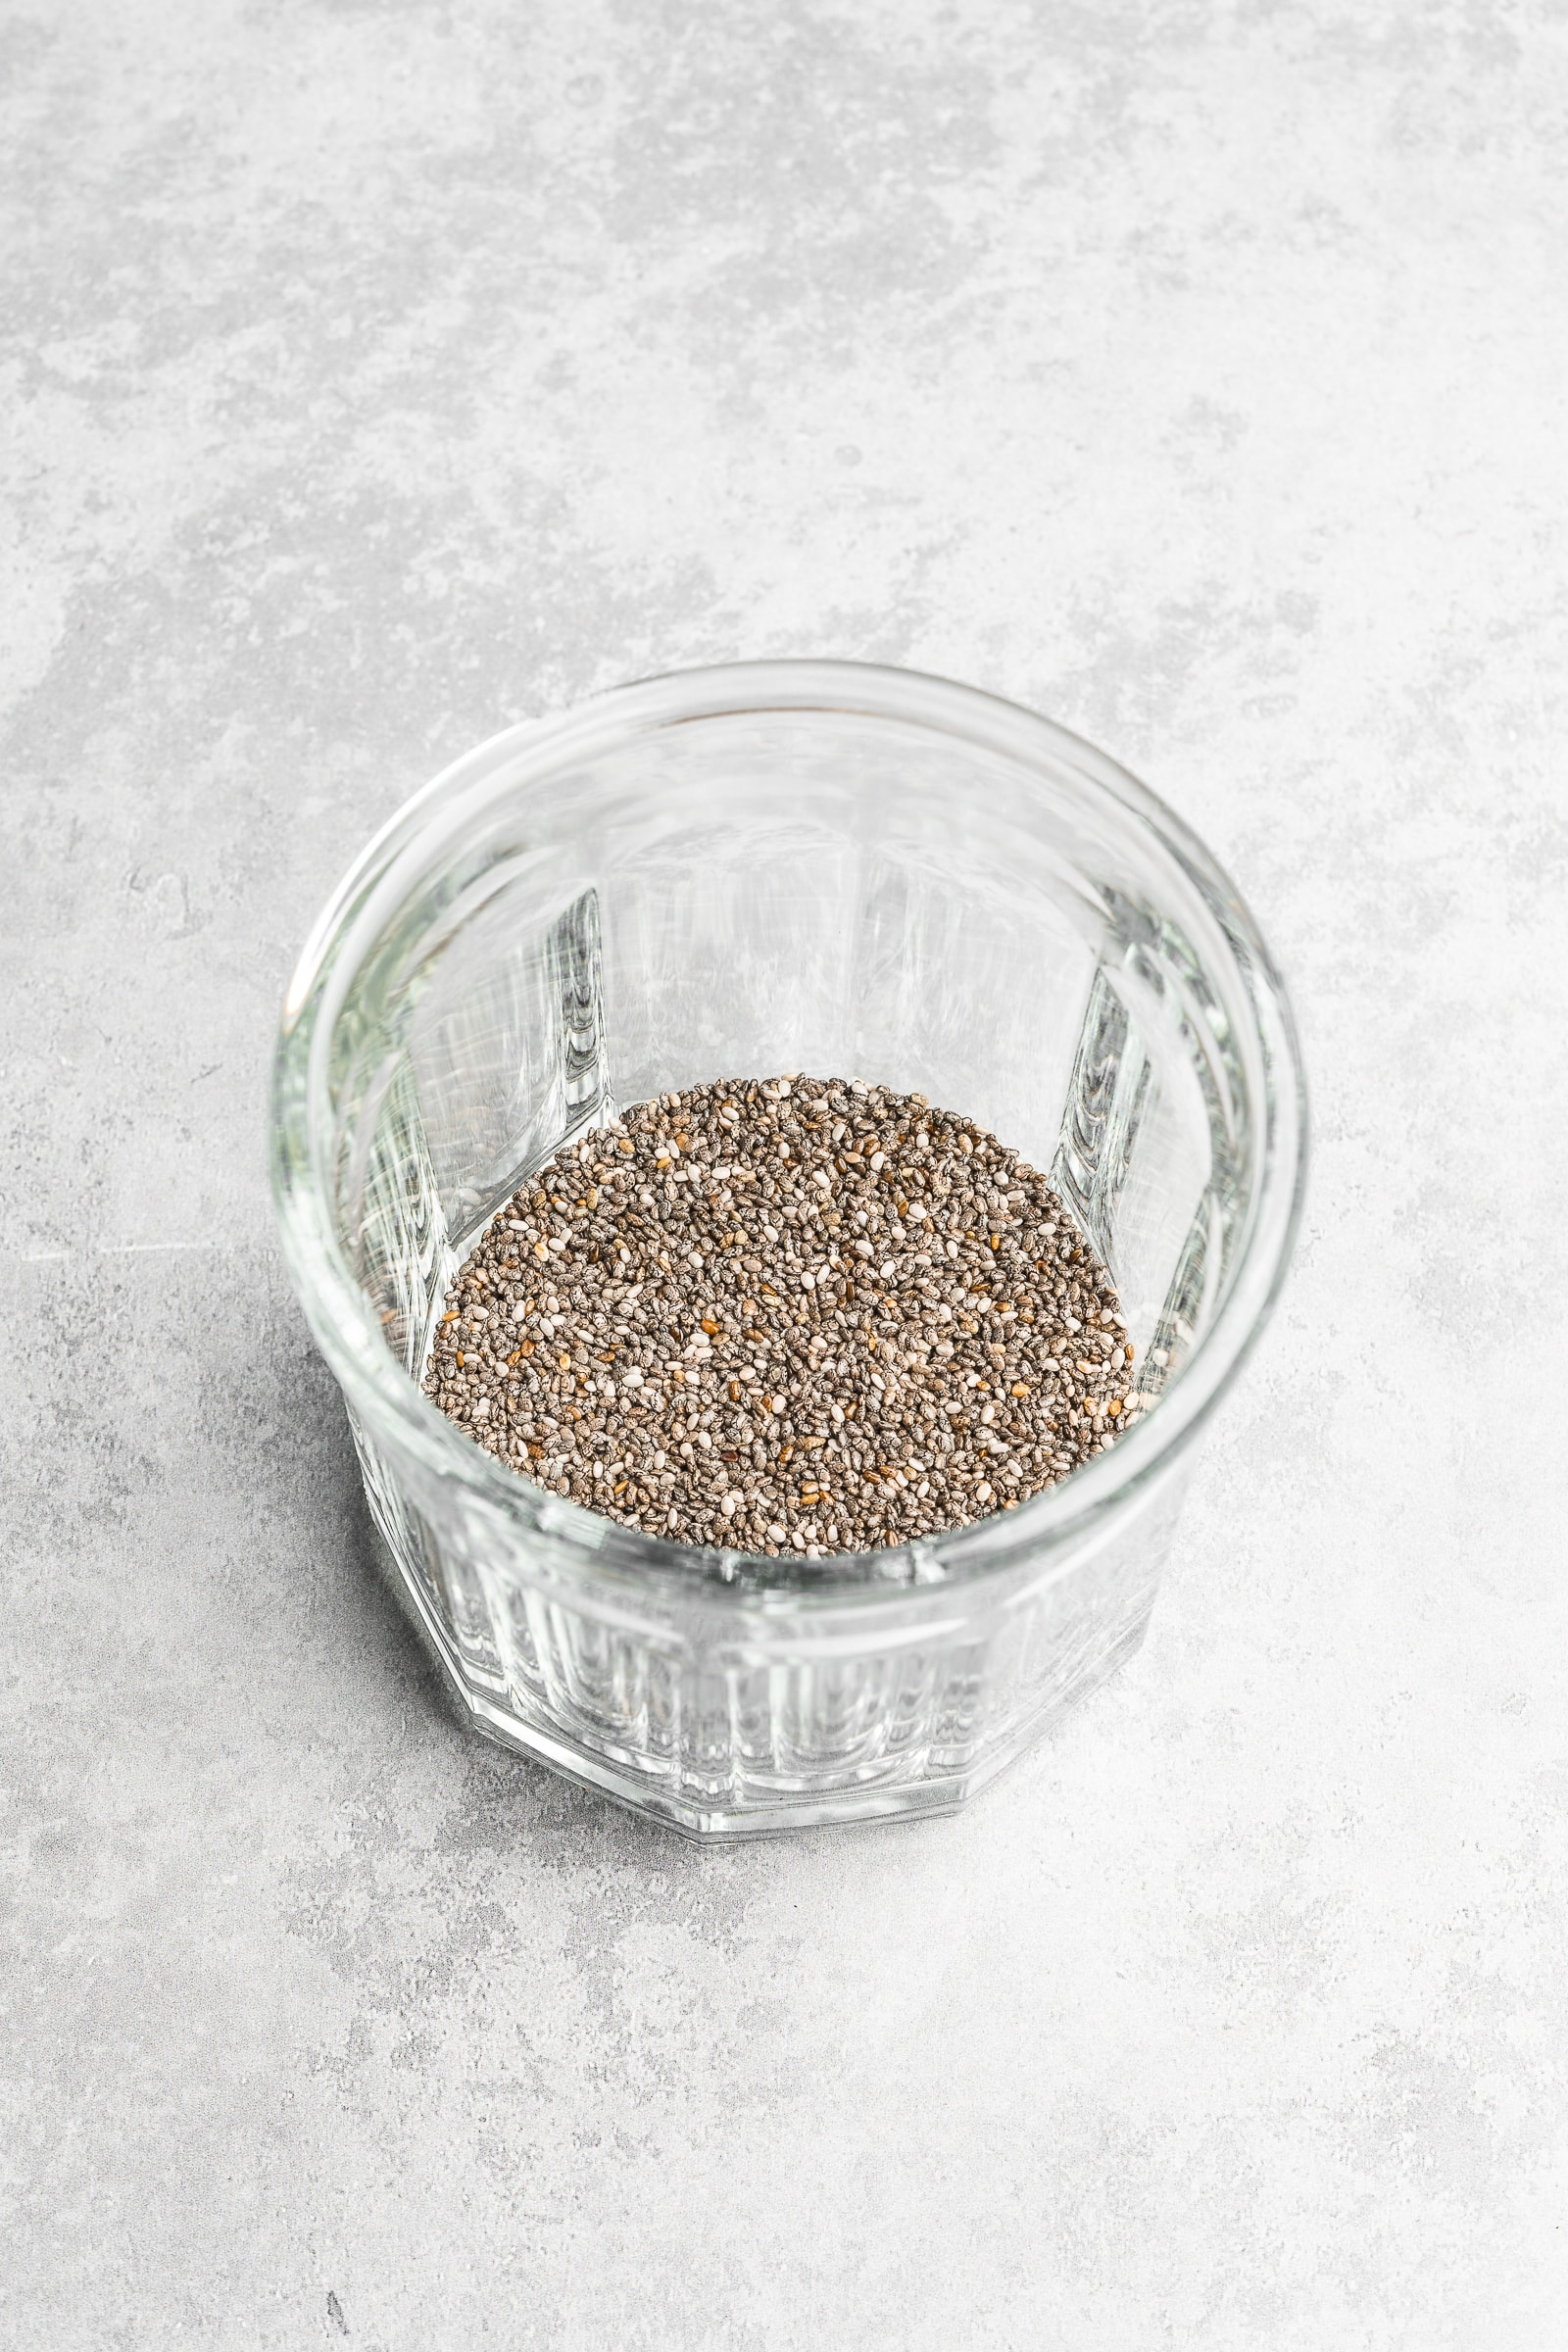 Chia seeds in a glass jar.